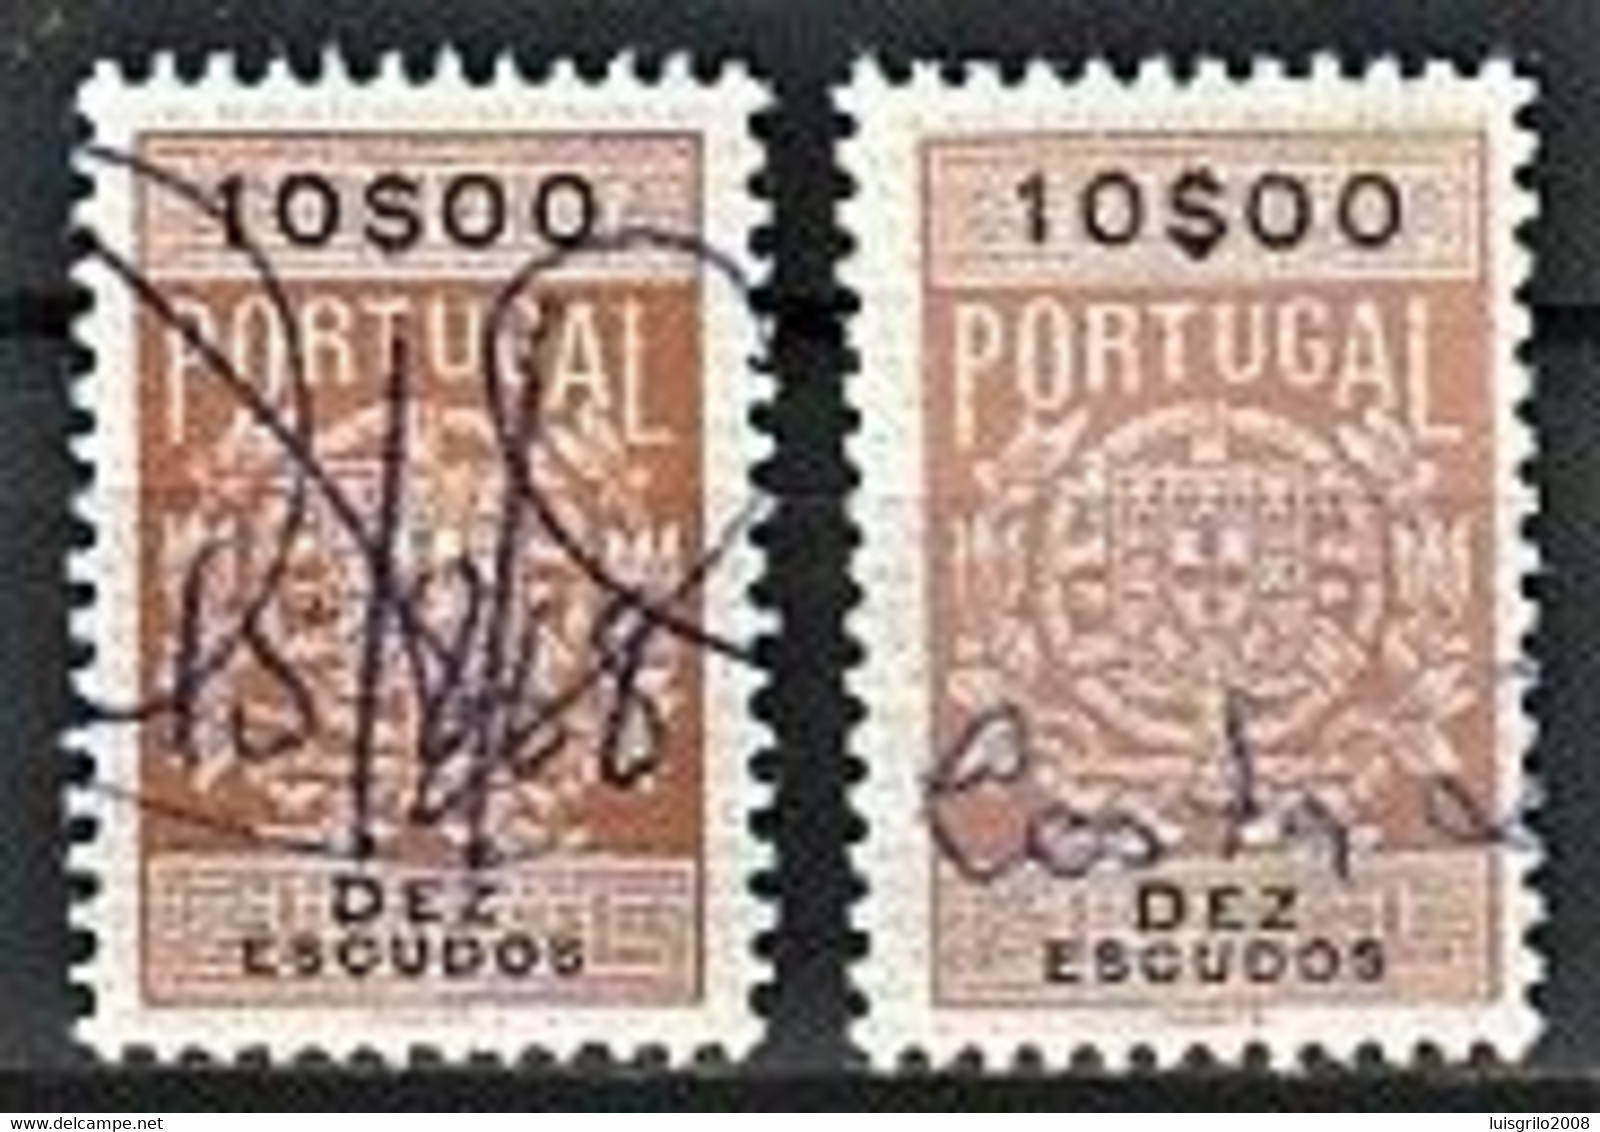 Fiscal/ Revenue, Portugal 1940 - Estampilha Fiscal -|- 10$00 - COLOR VARIANT - Is The Stamp Of The Right - Used Stamps